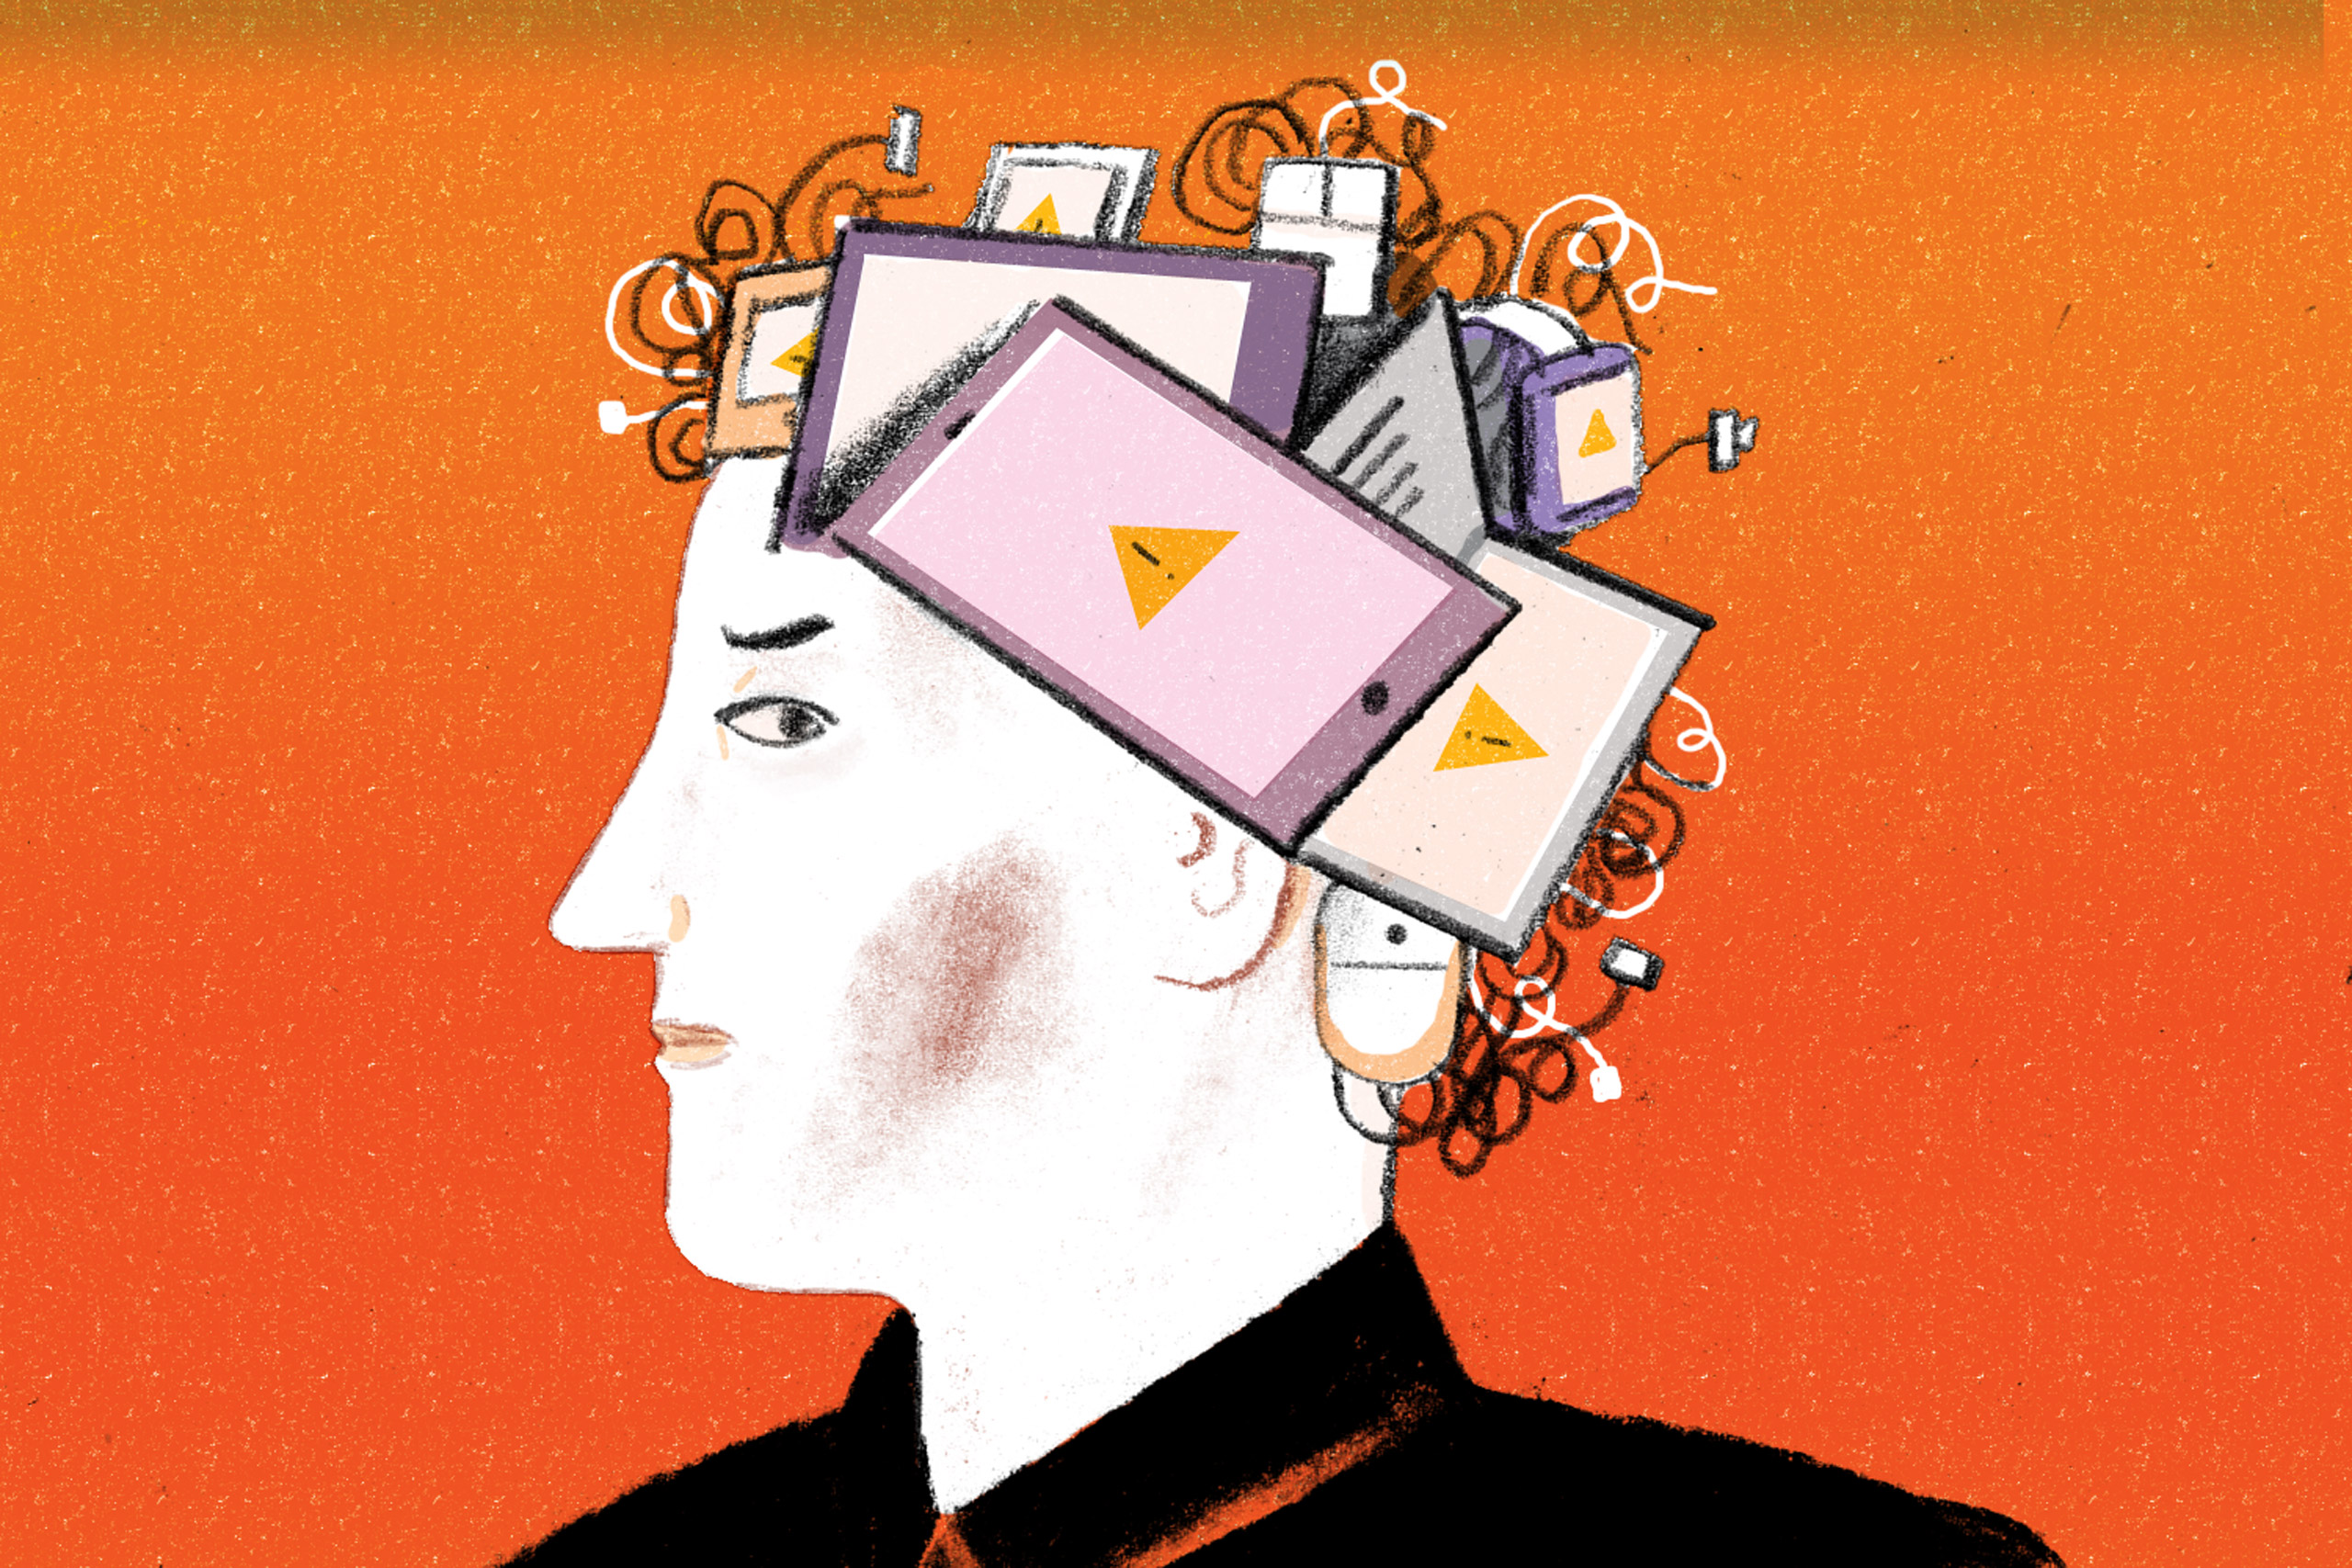 You Asked: Are All My Devices Messing With My Brain?